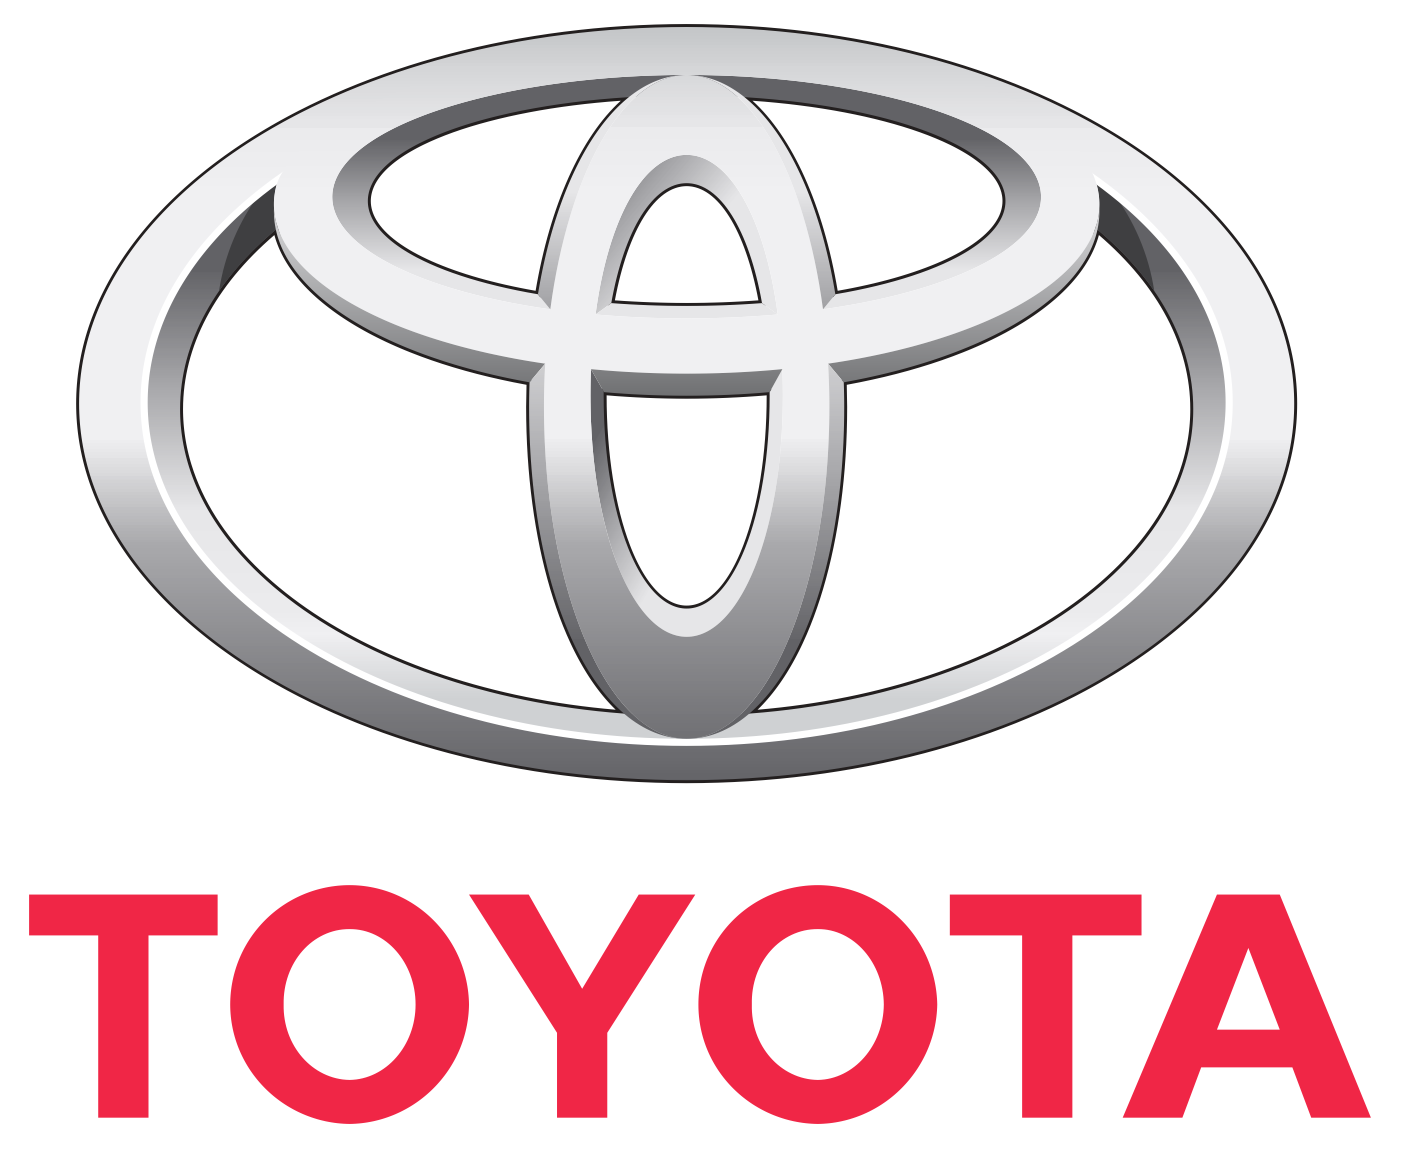 Toyota Logo Png Transparent Hd Download - Toyota, Transparent background PNG HD thumbnail